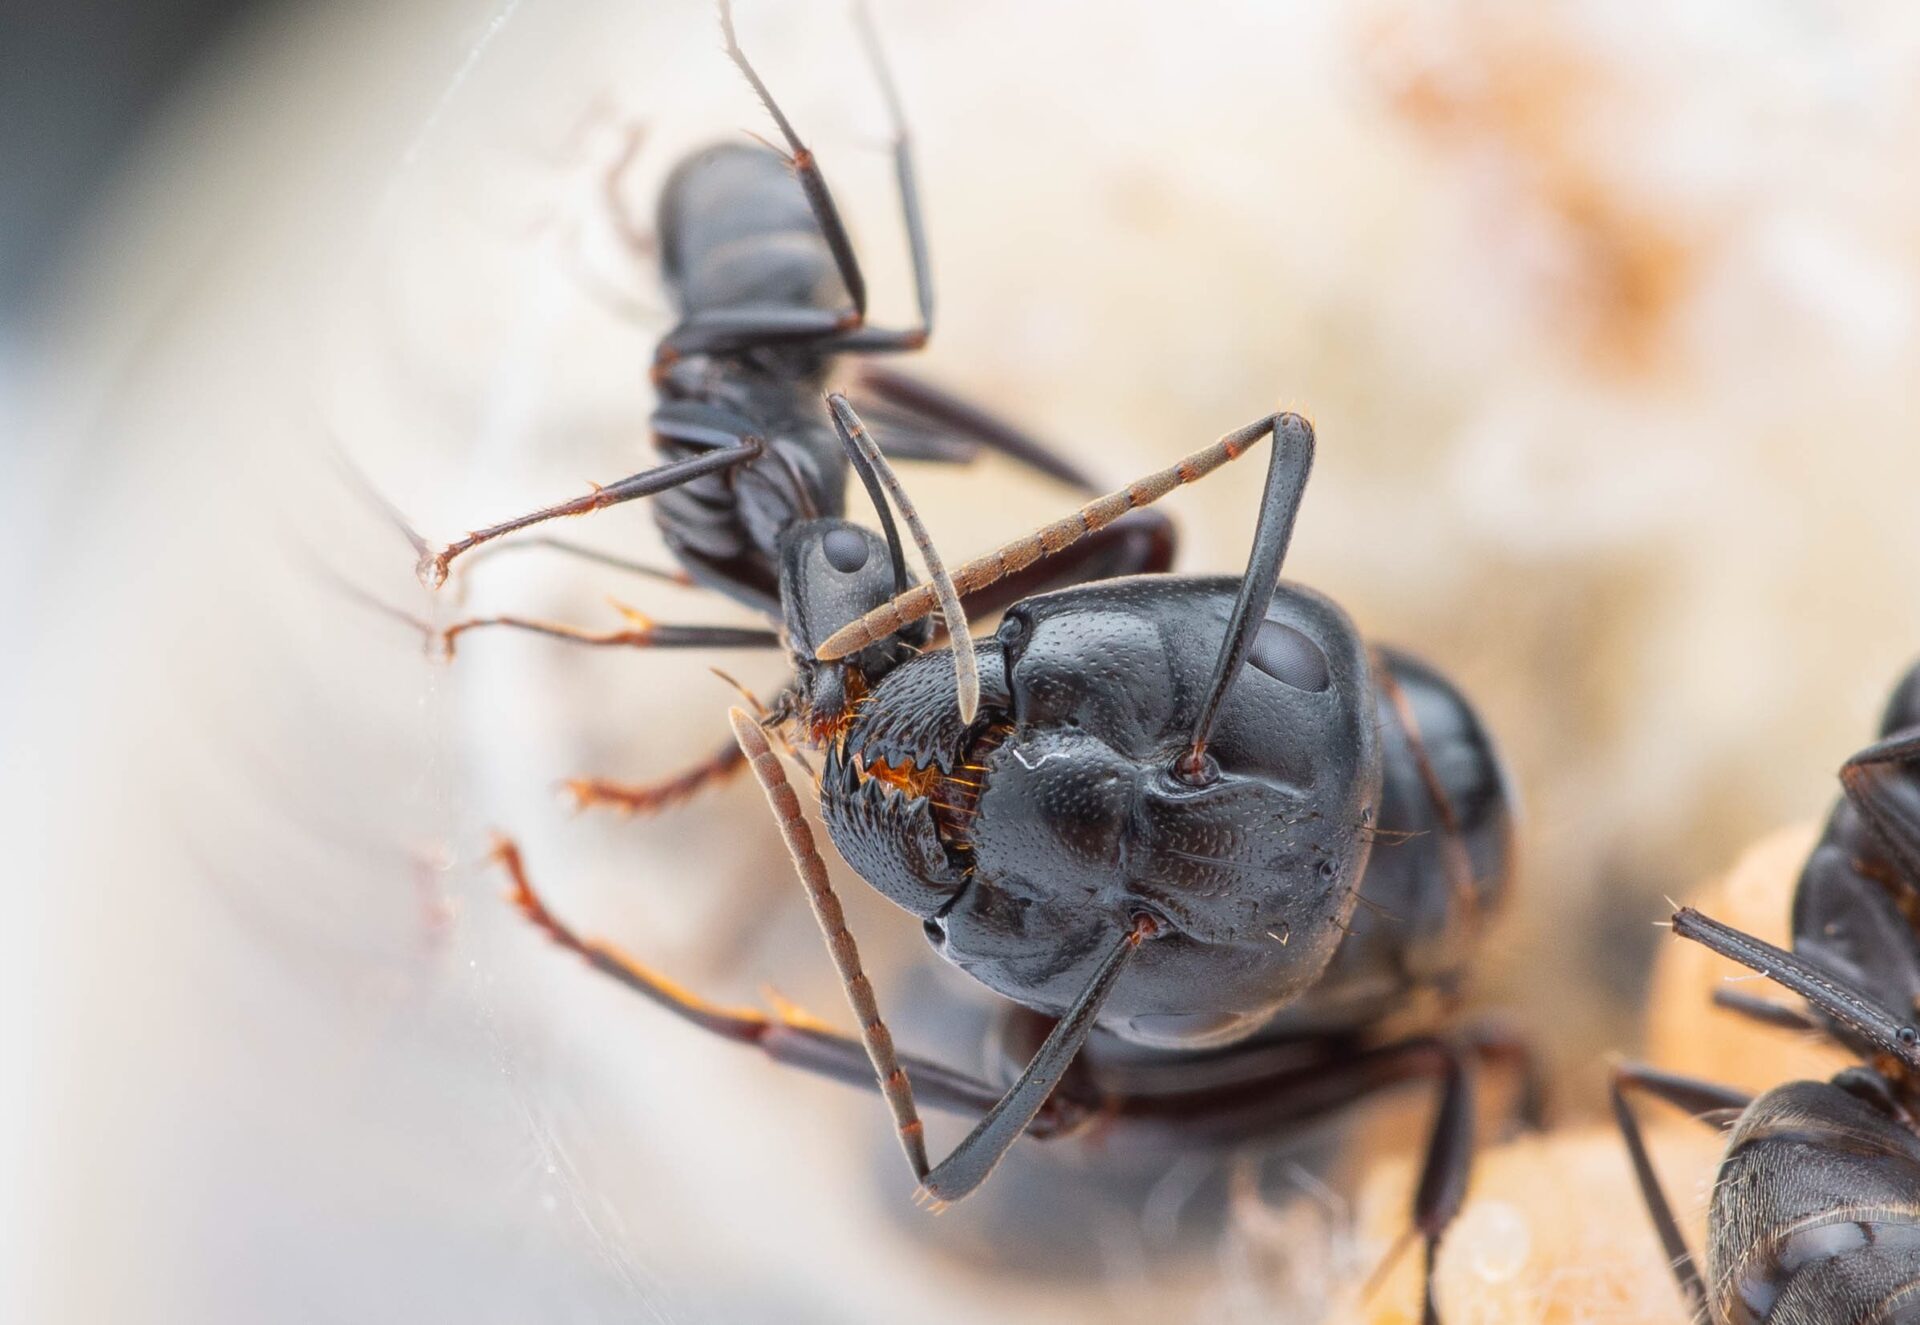 A Camponotus pennsylvanicus worker and queen perform trophillaxis.